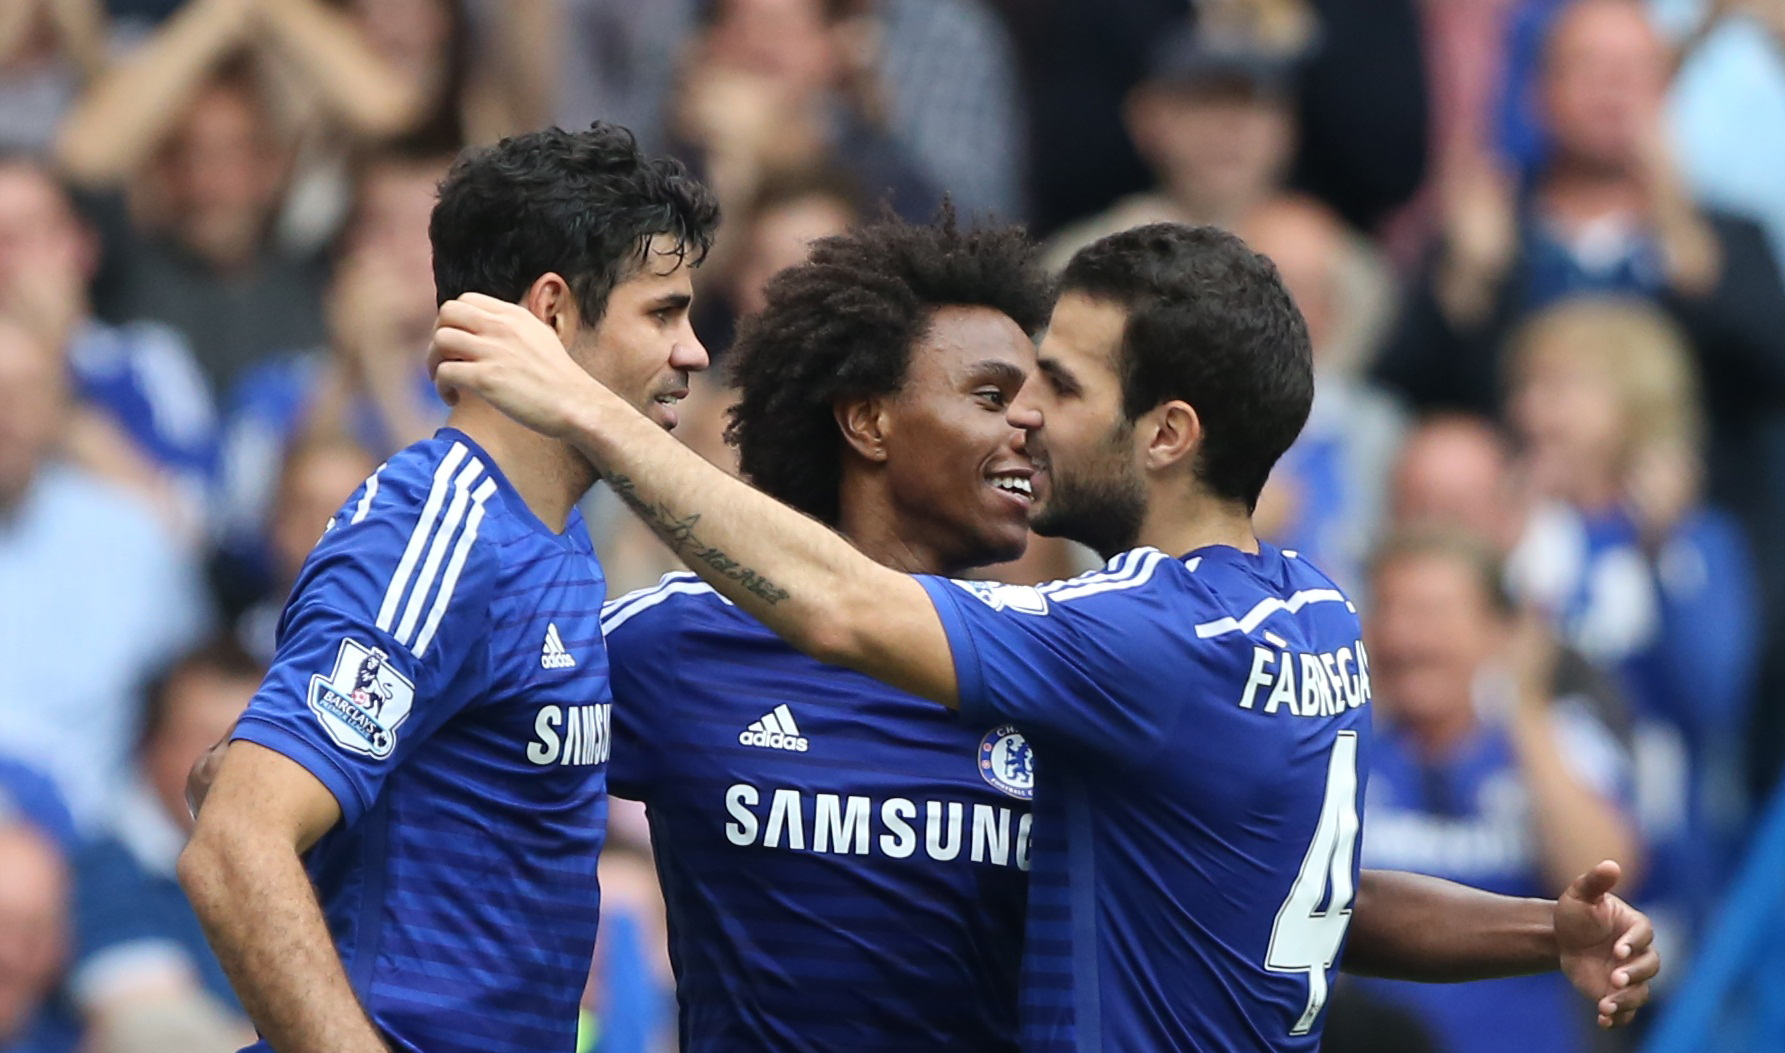 Chelsea march on, Man City wobble but win